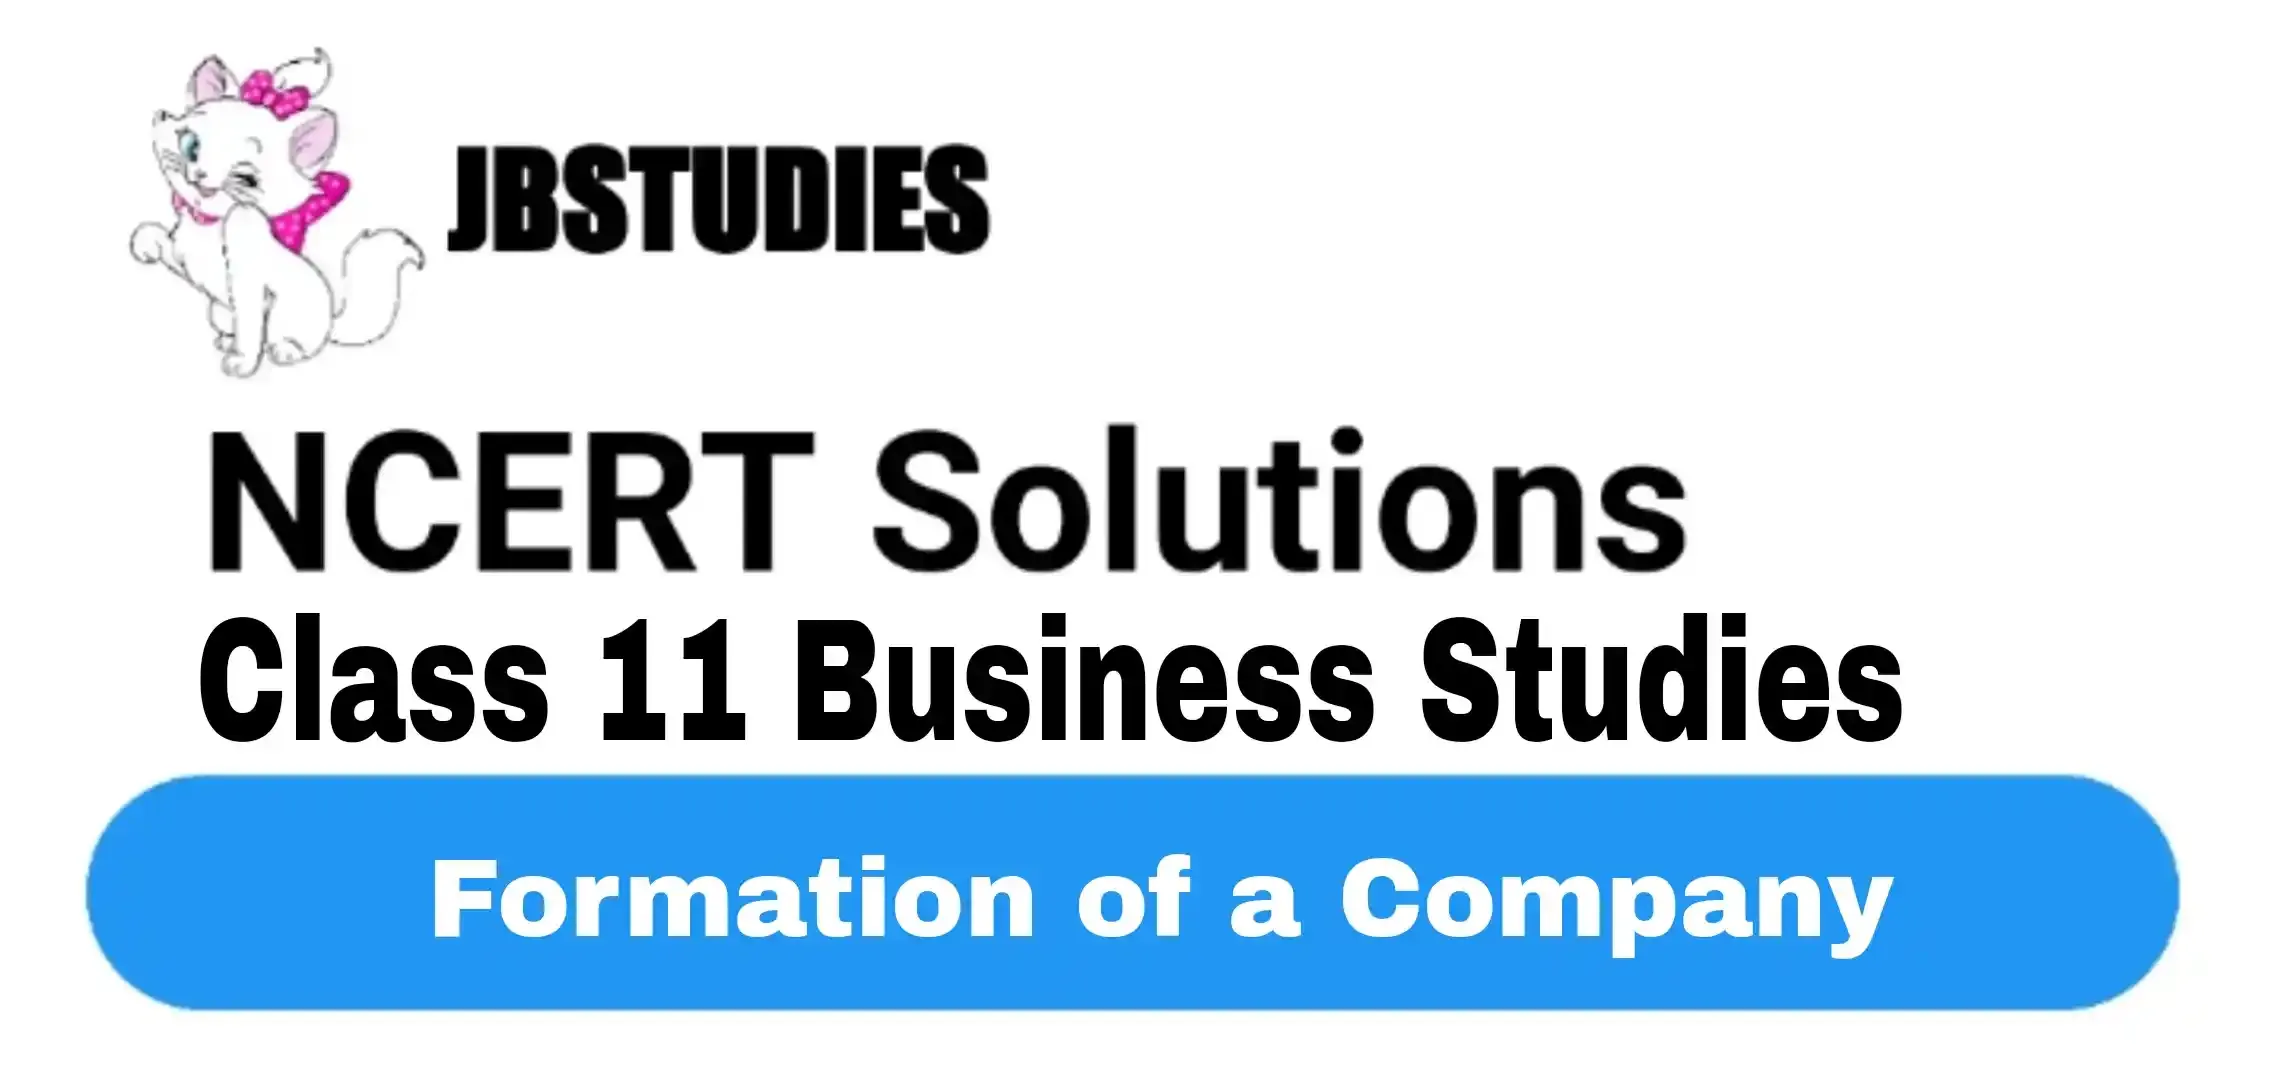 Solutions Class 11 Business Studies Chapter -7 (Formation of a Company)